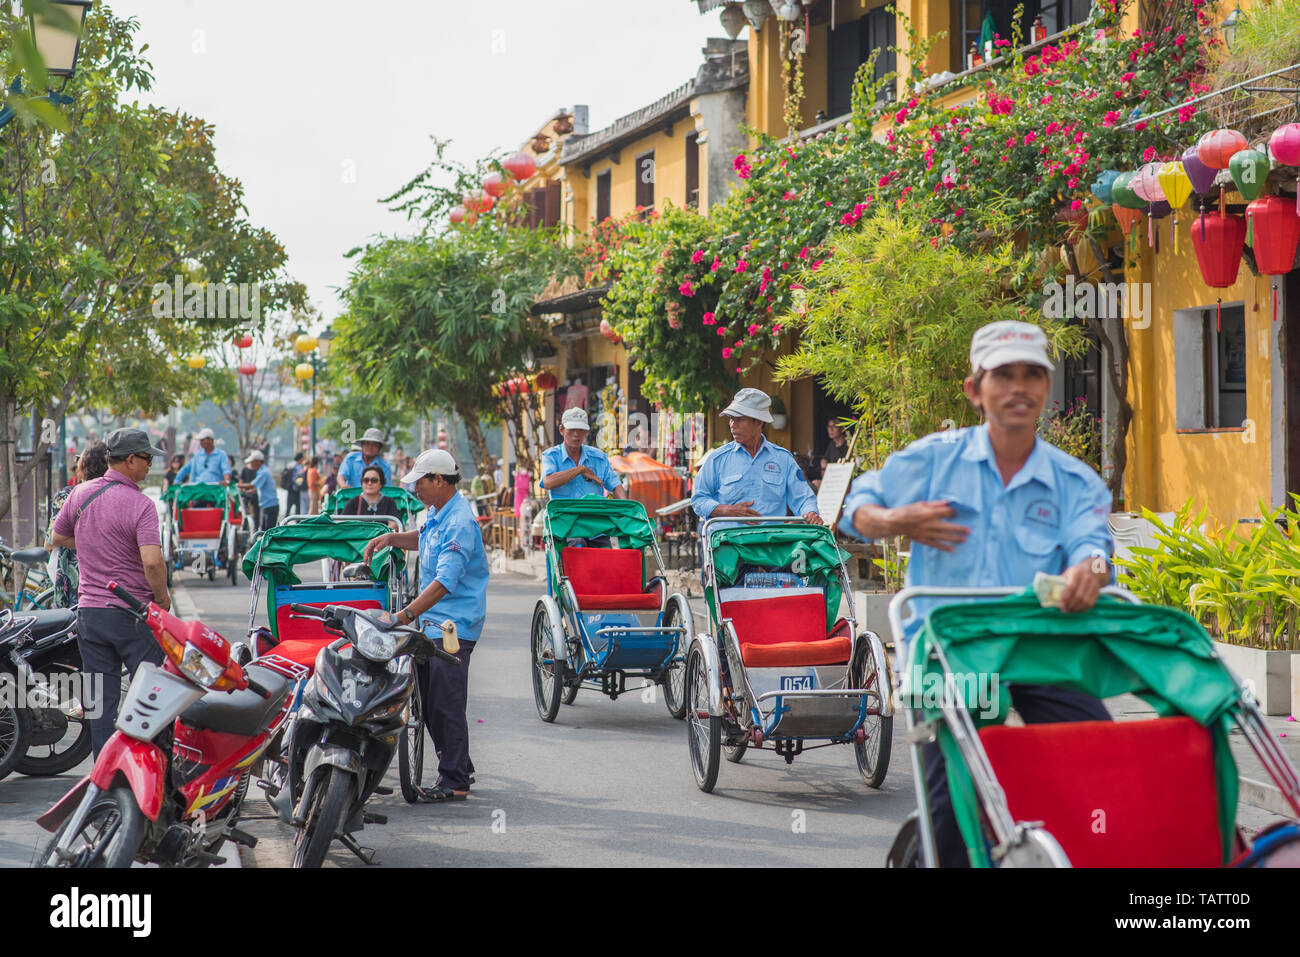 Hoi An, Vietnam - October 28, 2018: the old town's street with its rickshaws, yellow houses, lanterns, lush vegetation, and flowers. Stock Photo